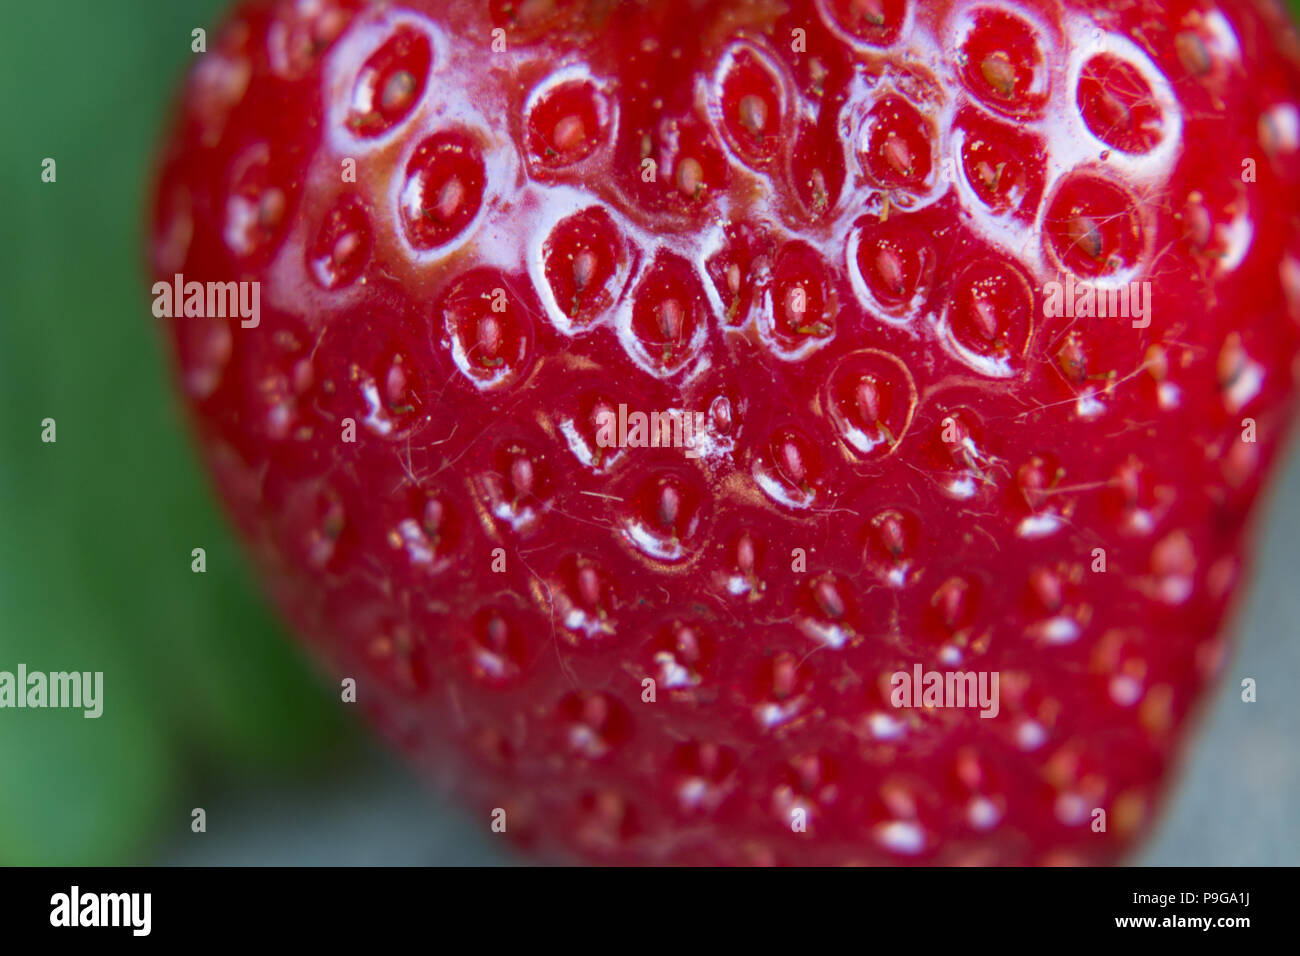 A delicious, juicy, ripe strawberry growing in the garden. Homegrown, organic strawberry. Stock Photo